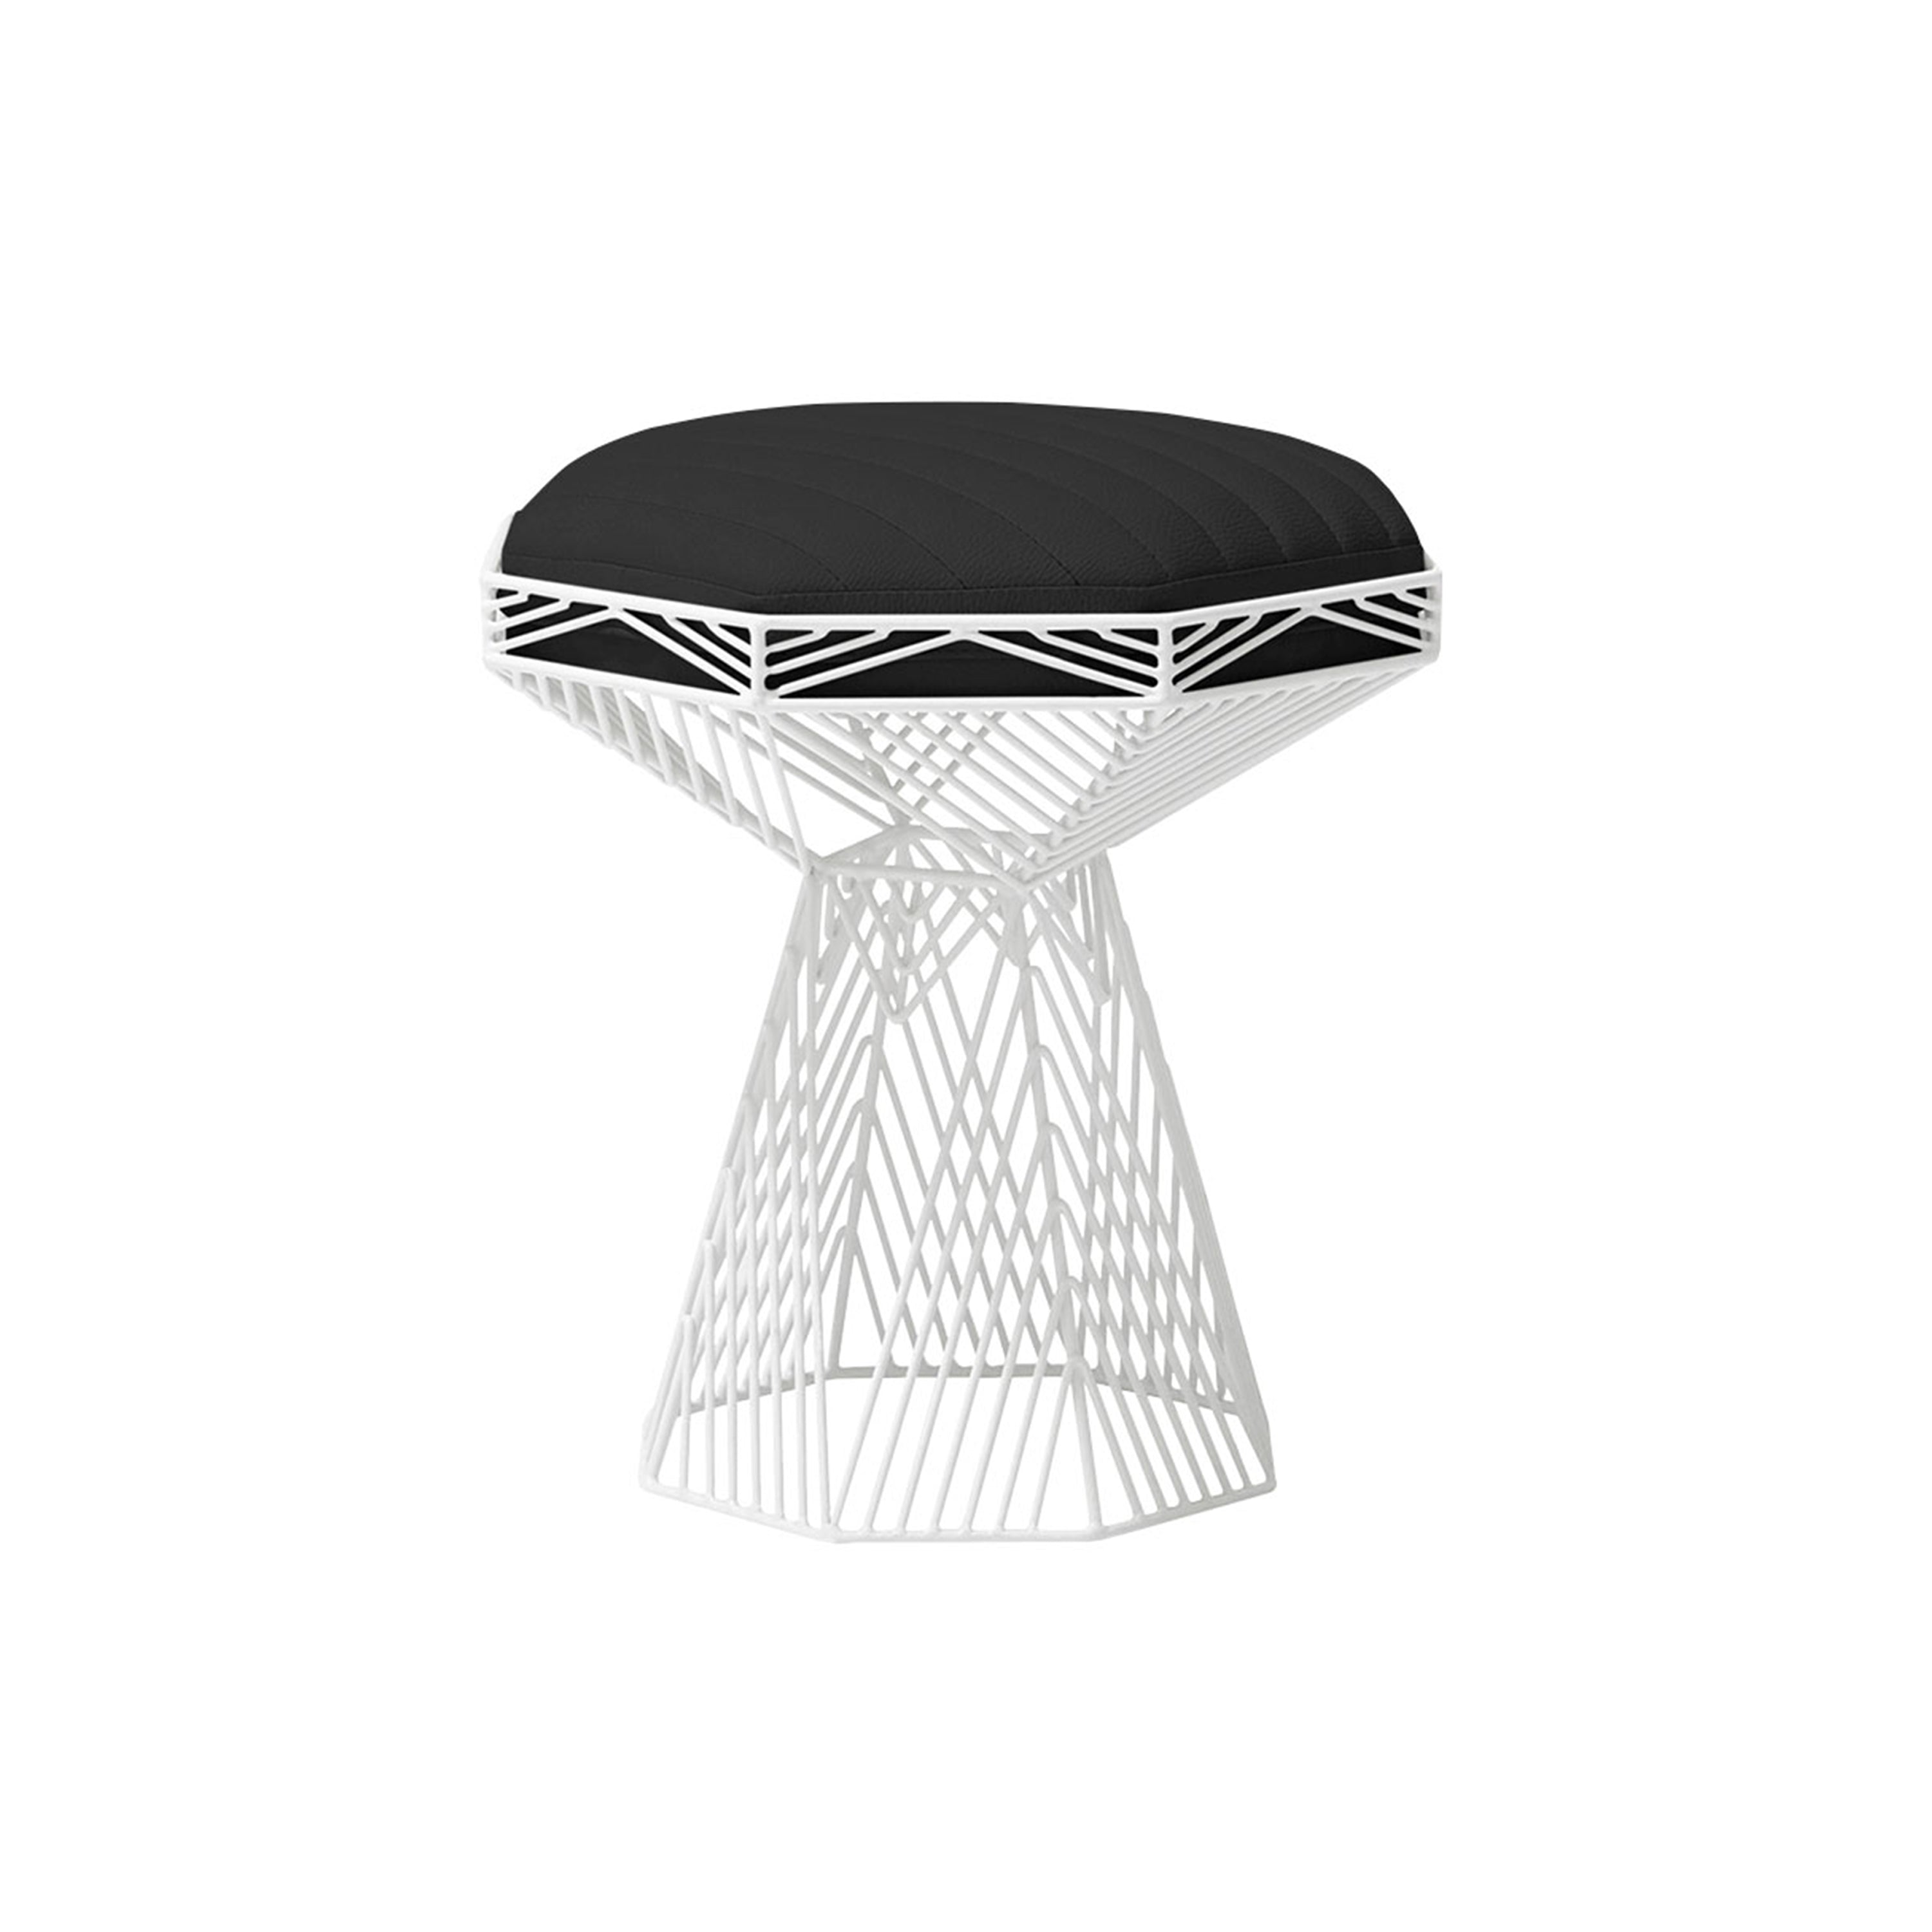 Switch Table/Stool: Color + White + Black